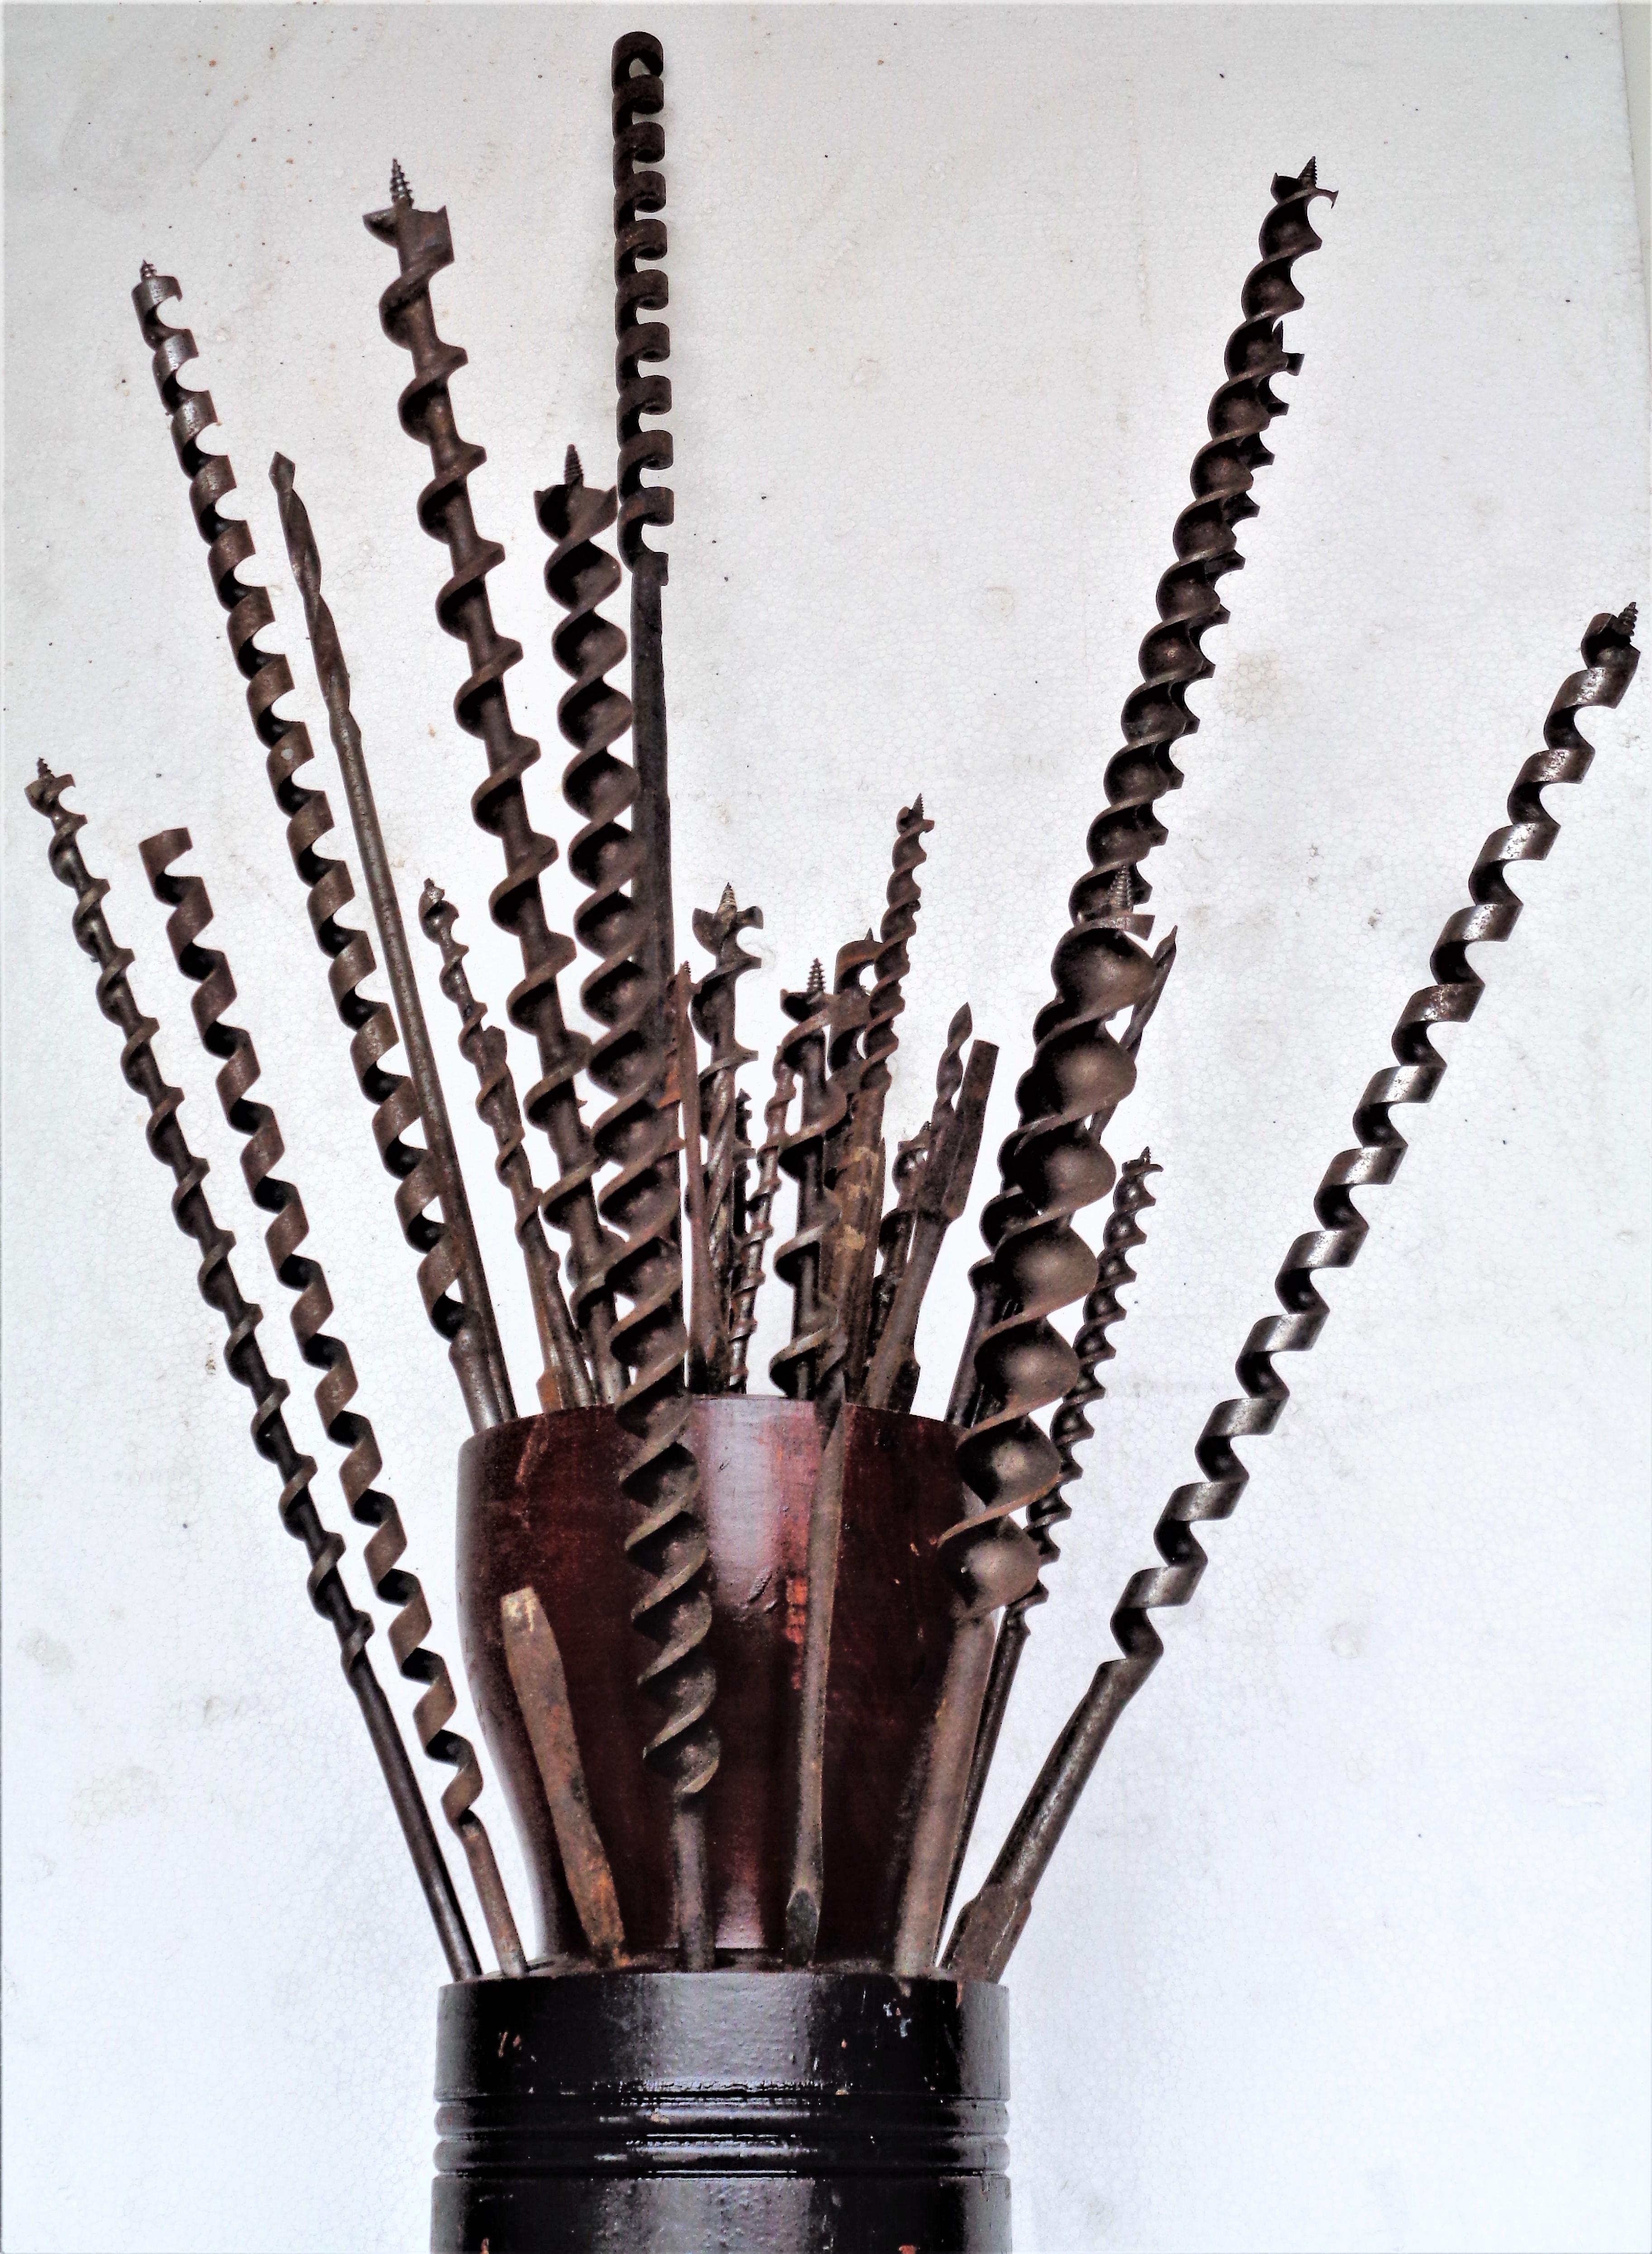 Antique industrial two tiered lathe turned wood drill bit holder with drill bits and augers. Drill bits are not fixed and can be arranged in different positions. Many of the drill bits are signed - some could be an uncommon or hard to find type, we